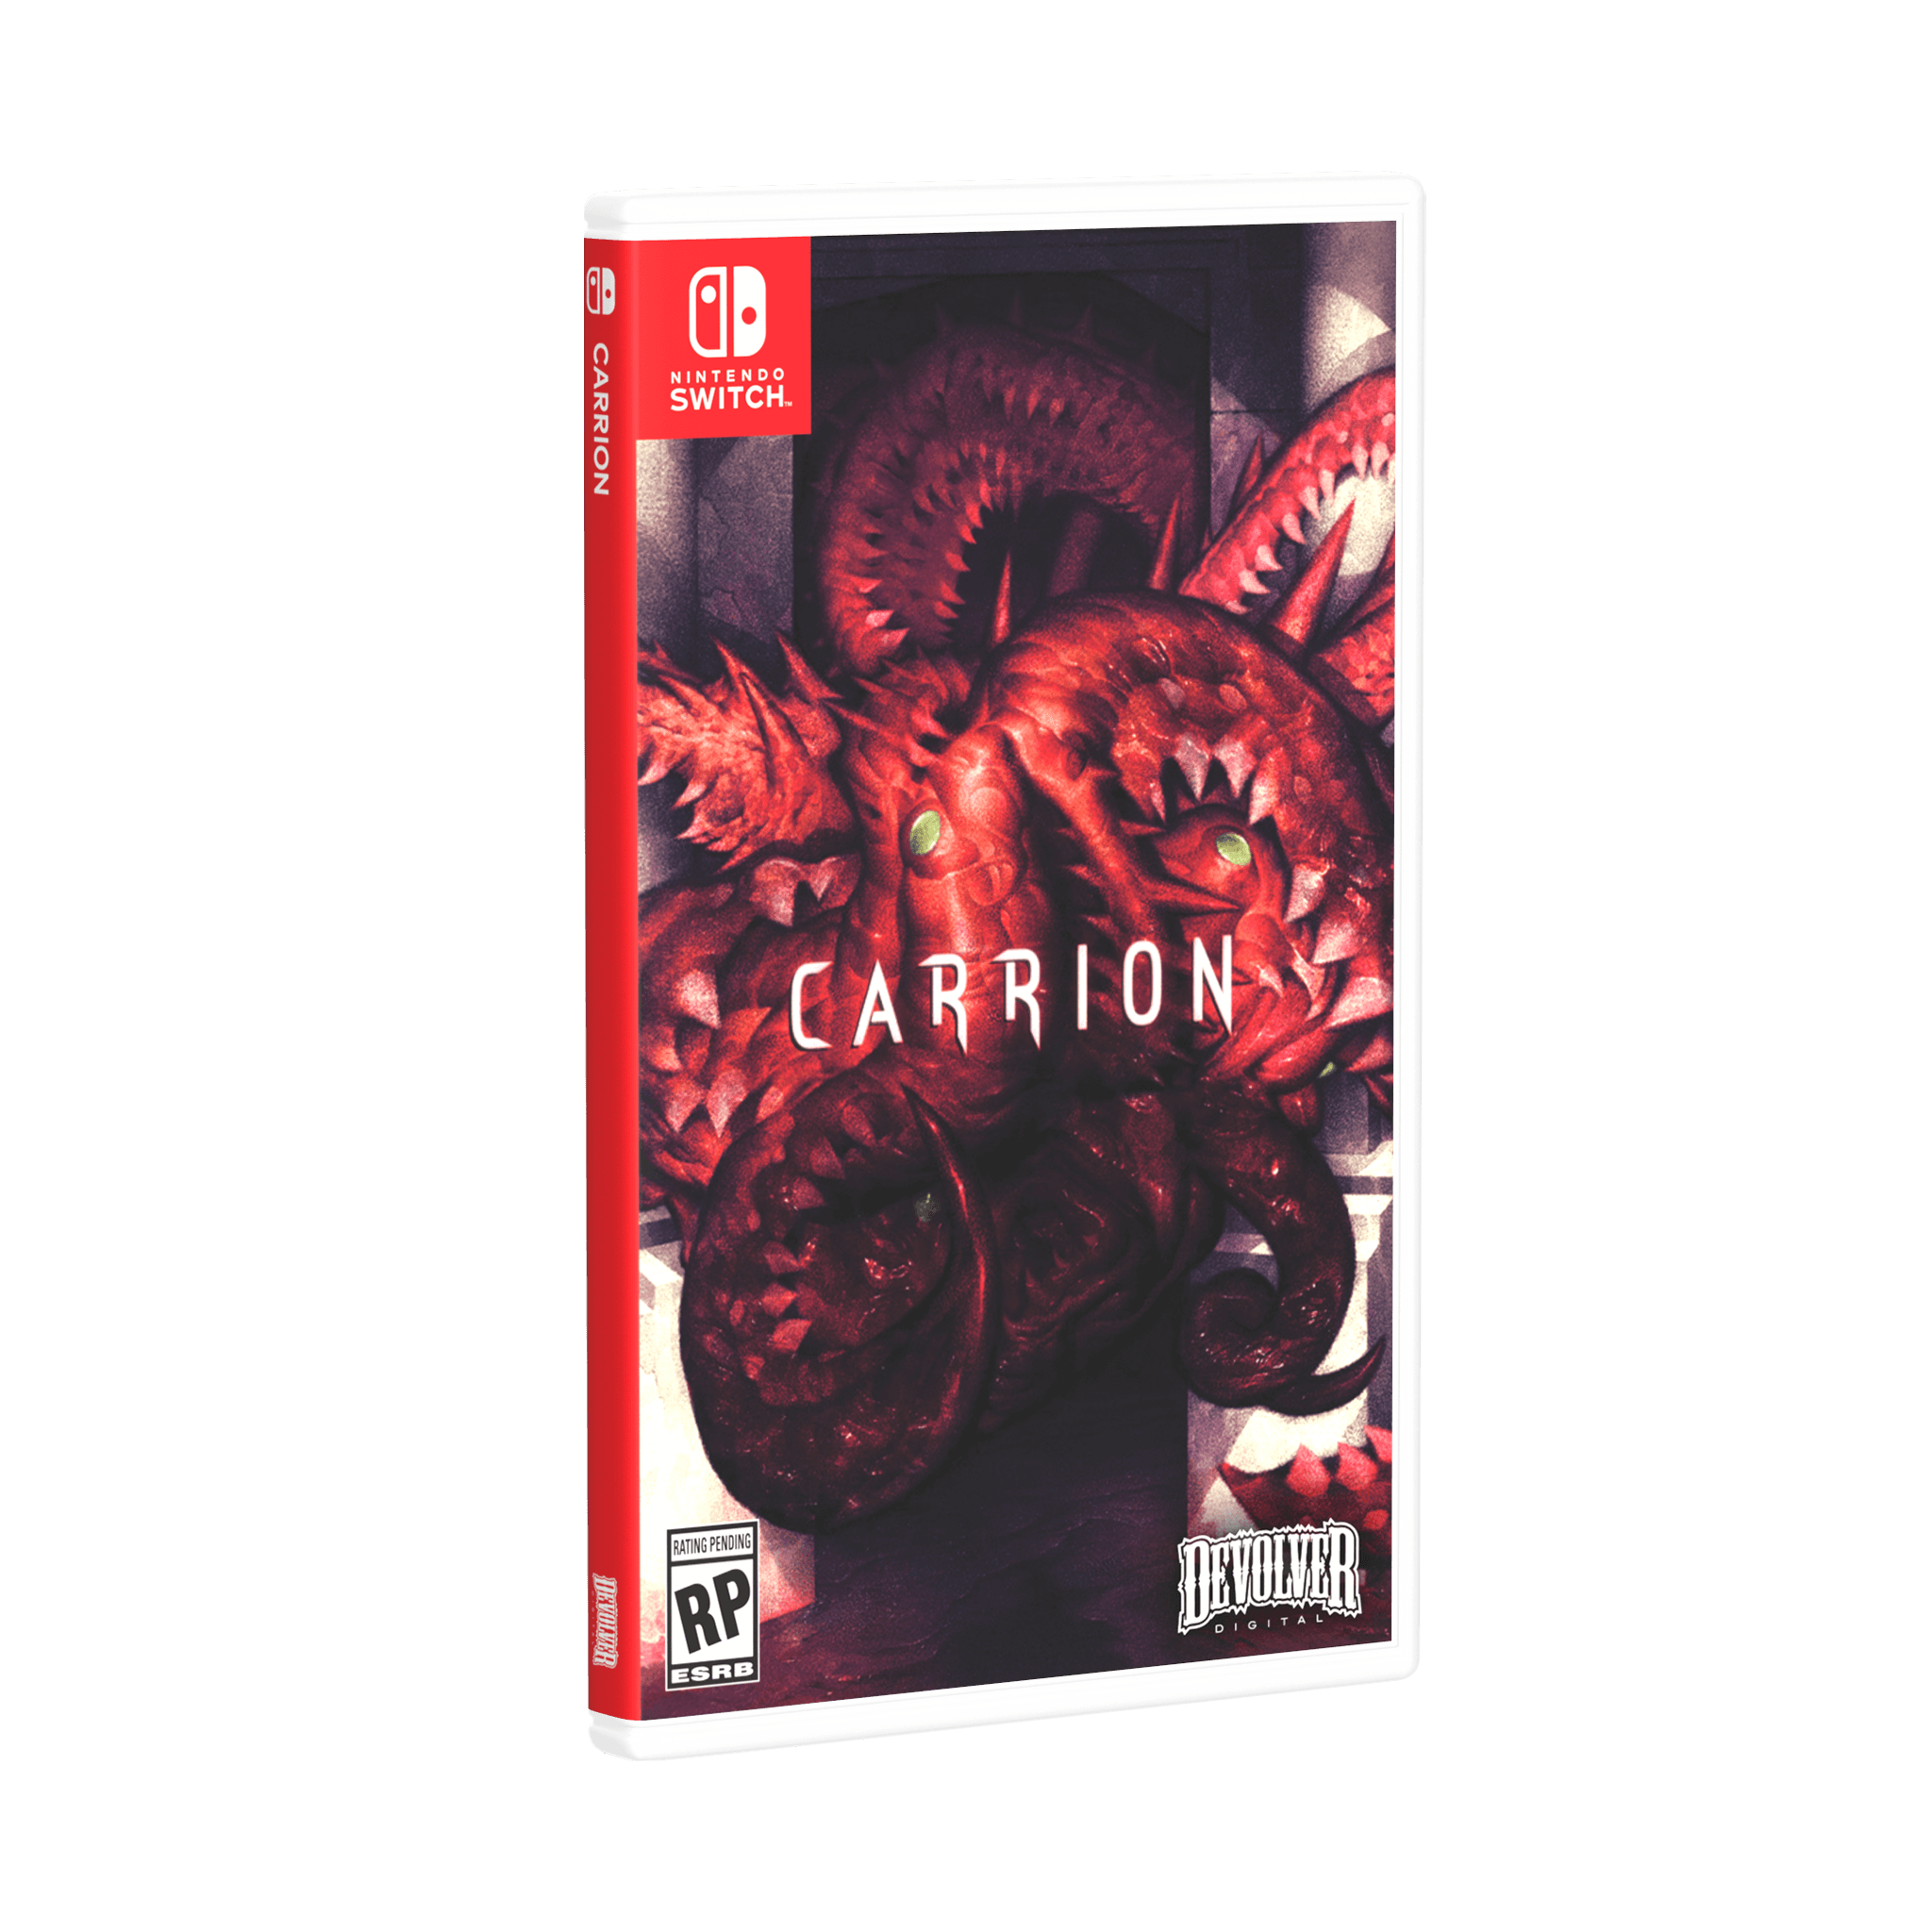 carrion switch release date